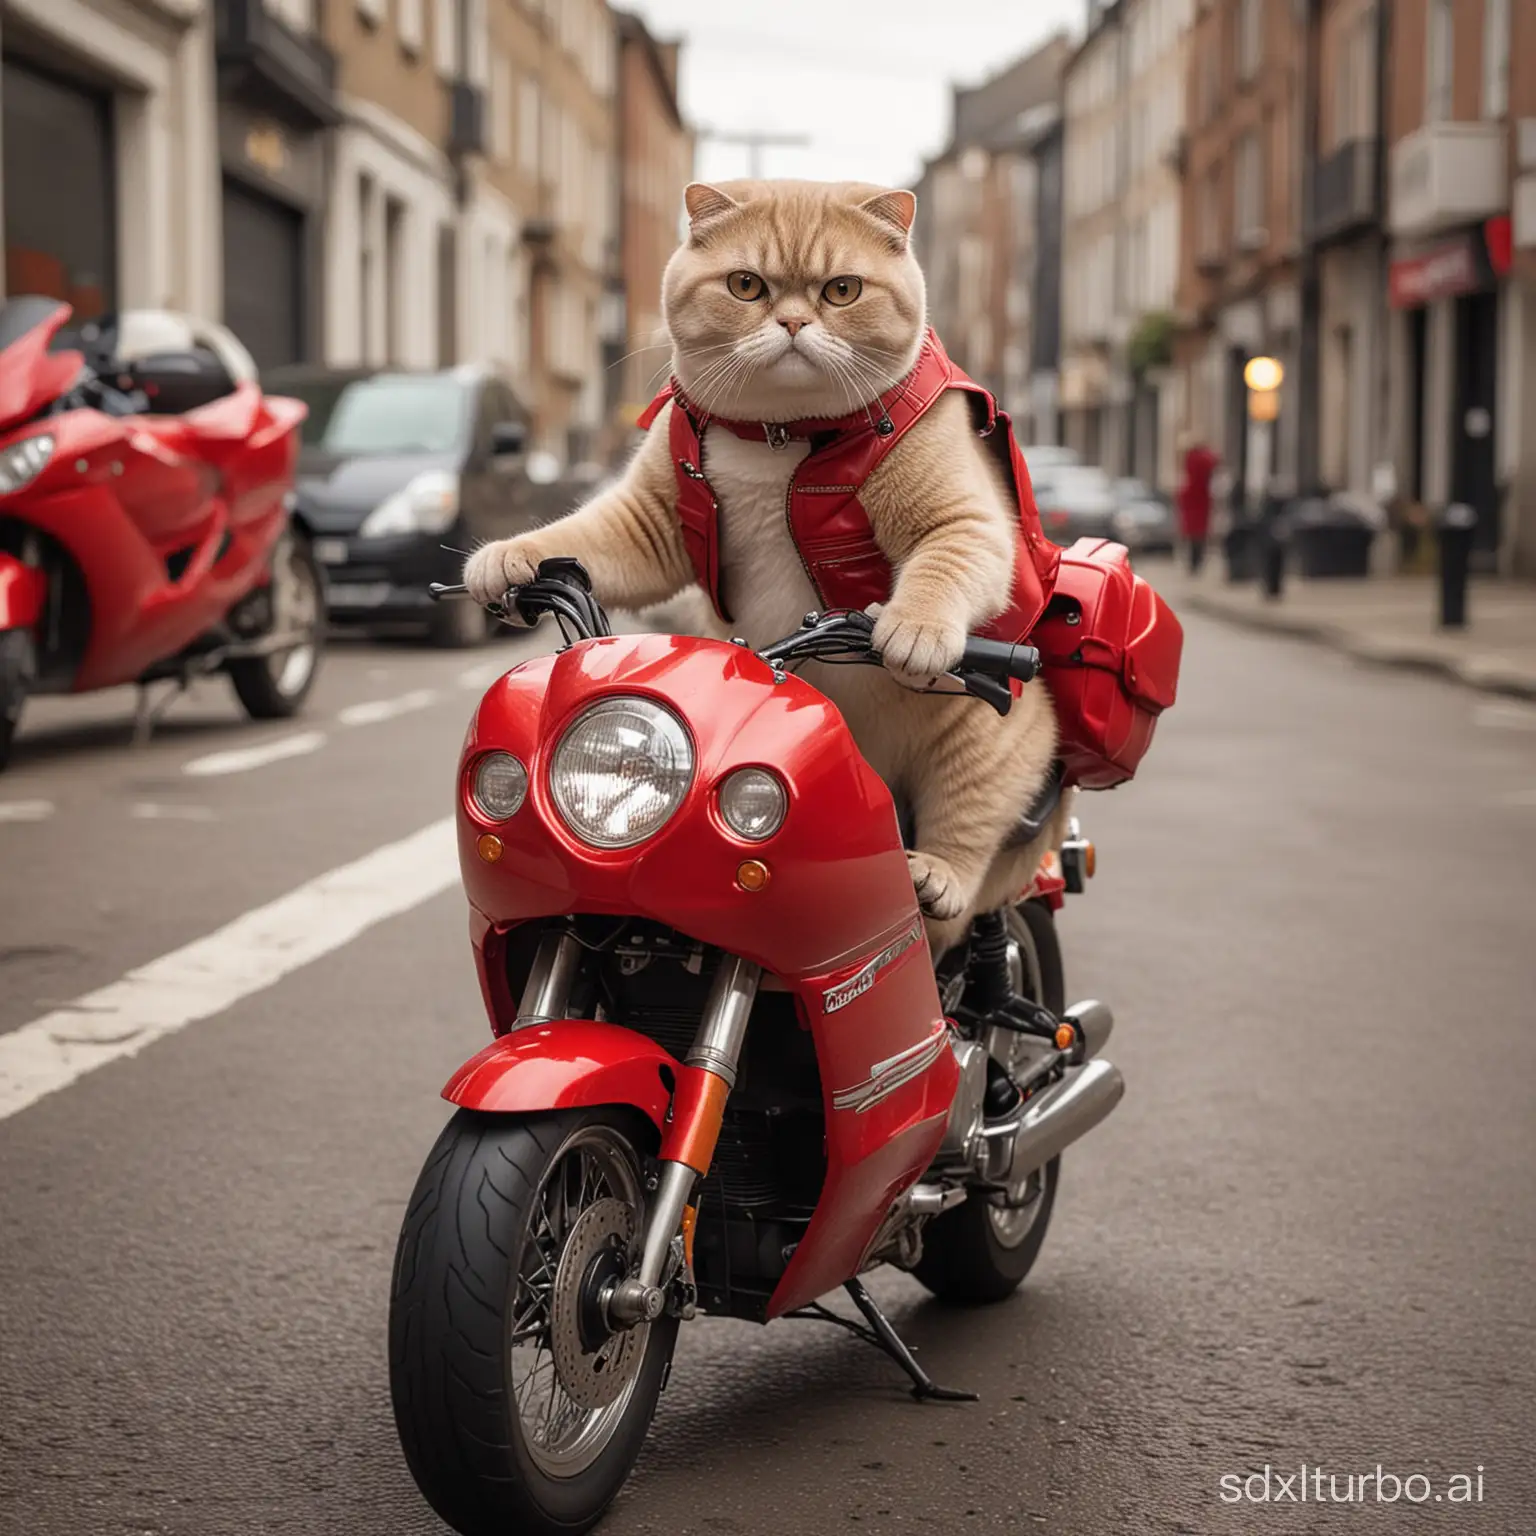 A muscular anthropomorphic Scottish Fold cat RIDING A RED SUPER MOTORCYCLE THROUGH THE STREETS